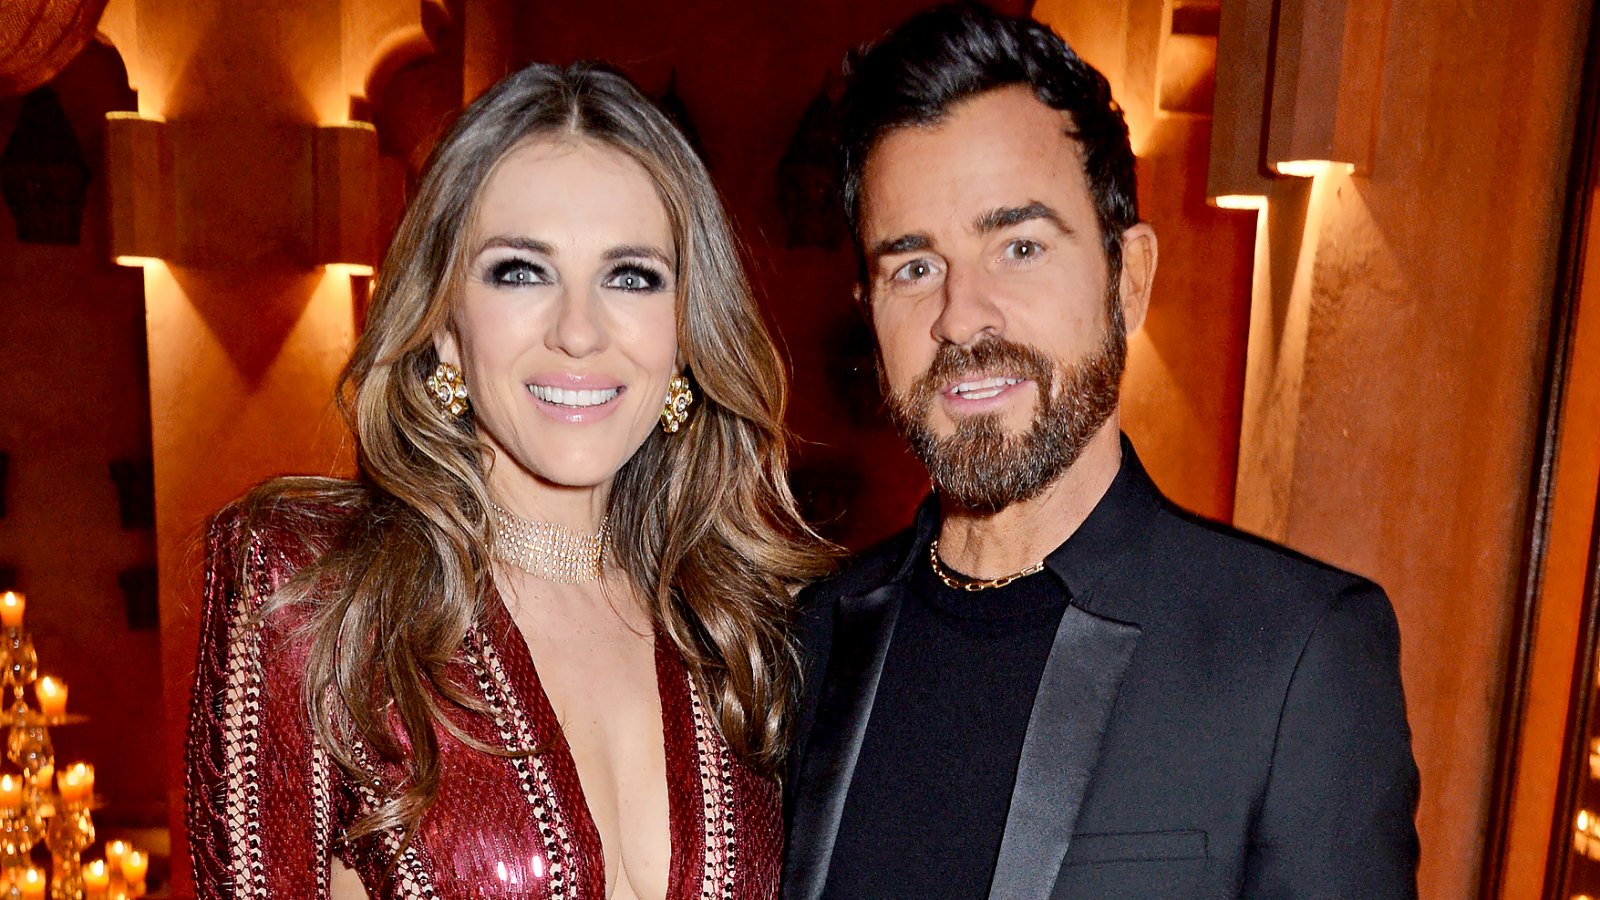 Elizabeth-Hurley-dating-Justin-Theroux